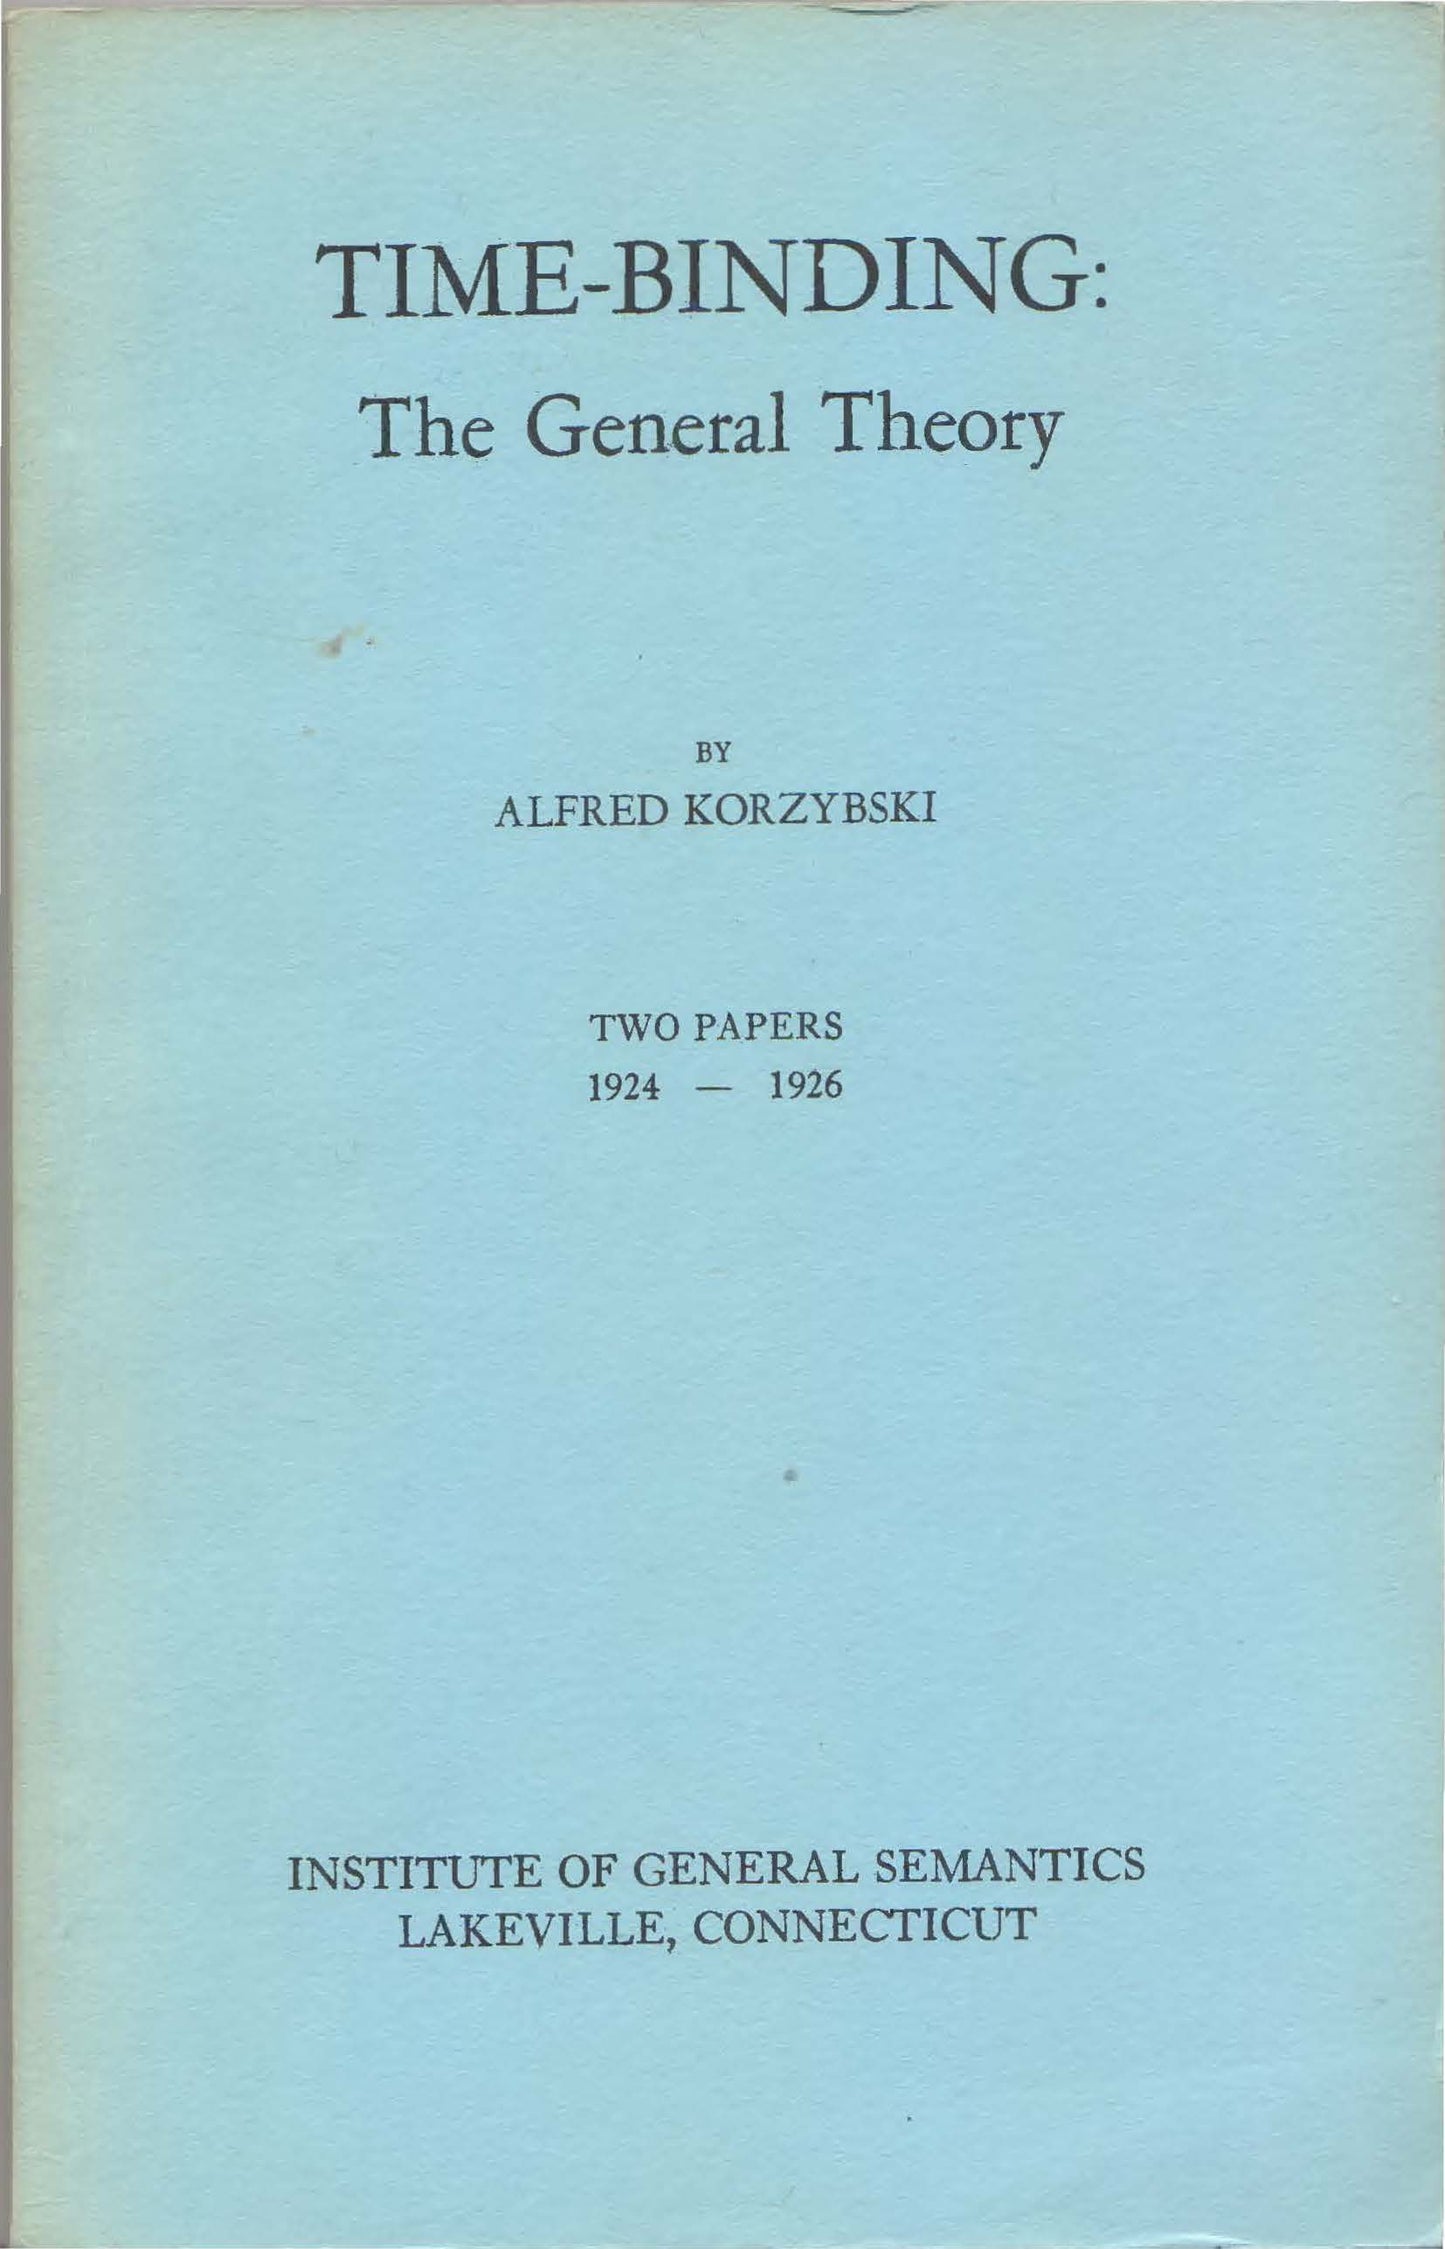 PDF Version: Time-Binding: The General Theory